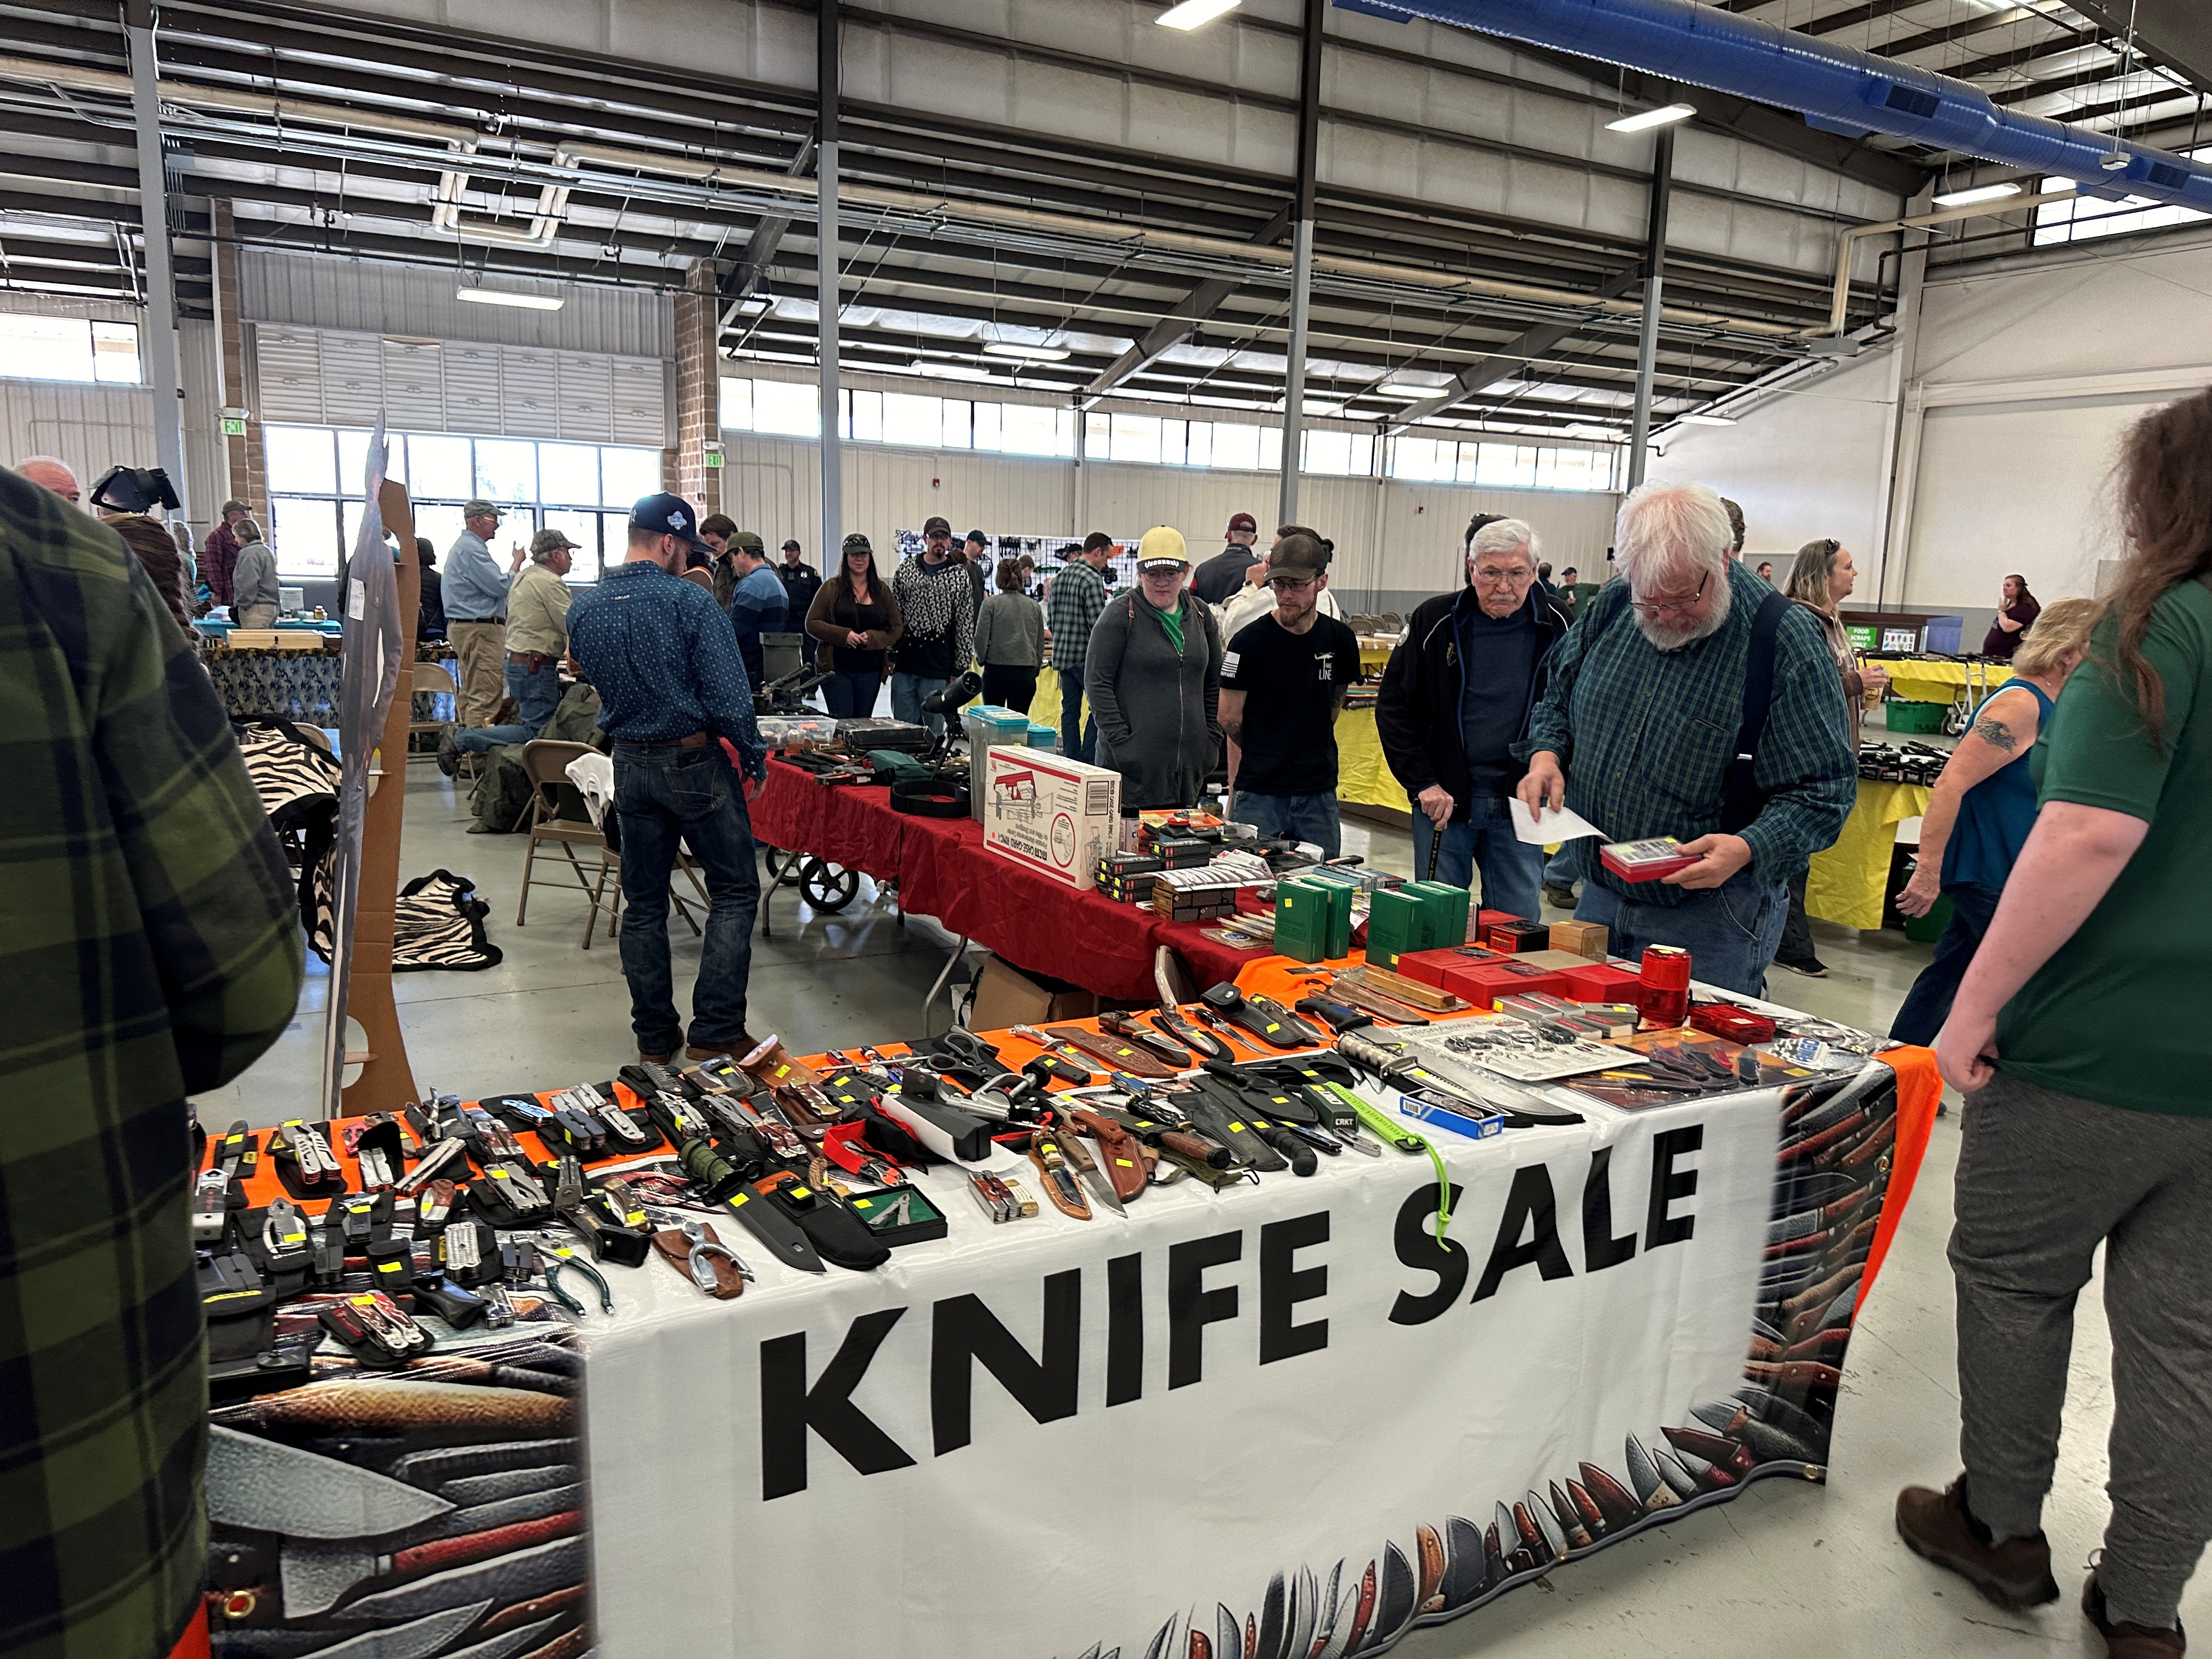 Knives are displayed for sale at the Survival & Prepper Show in Longmont